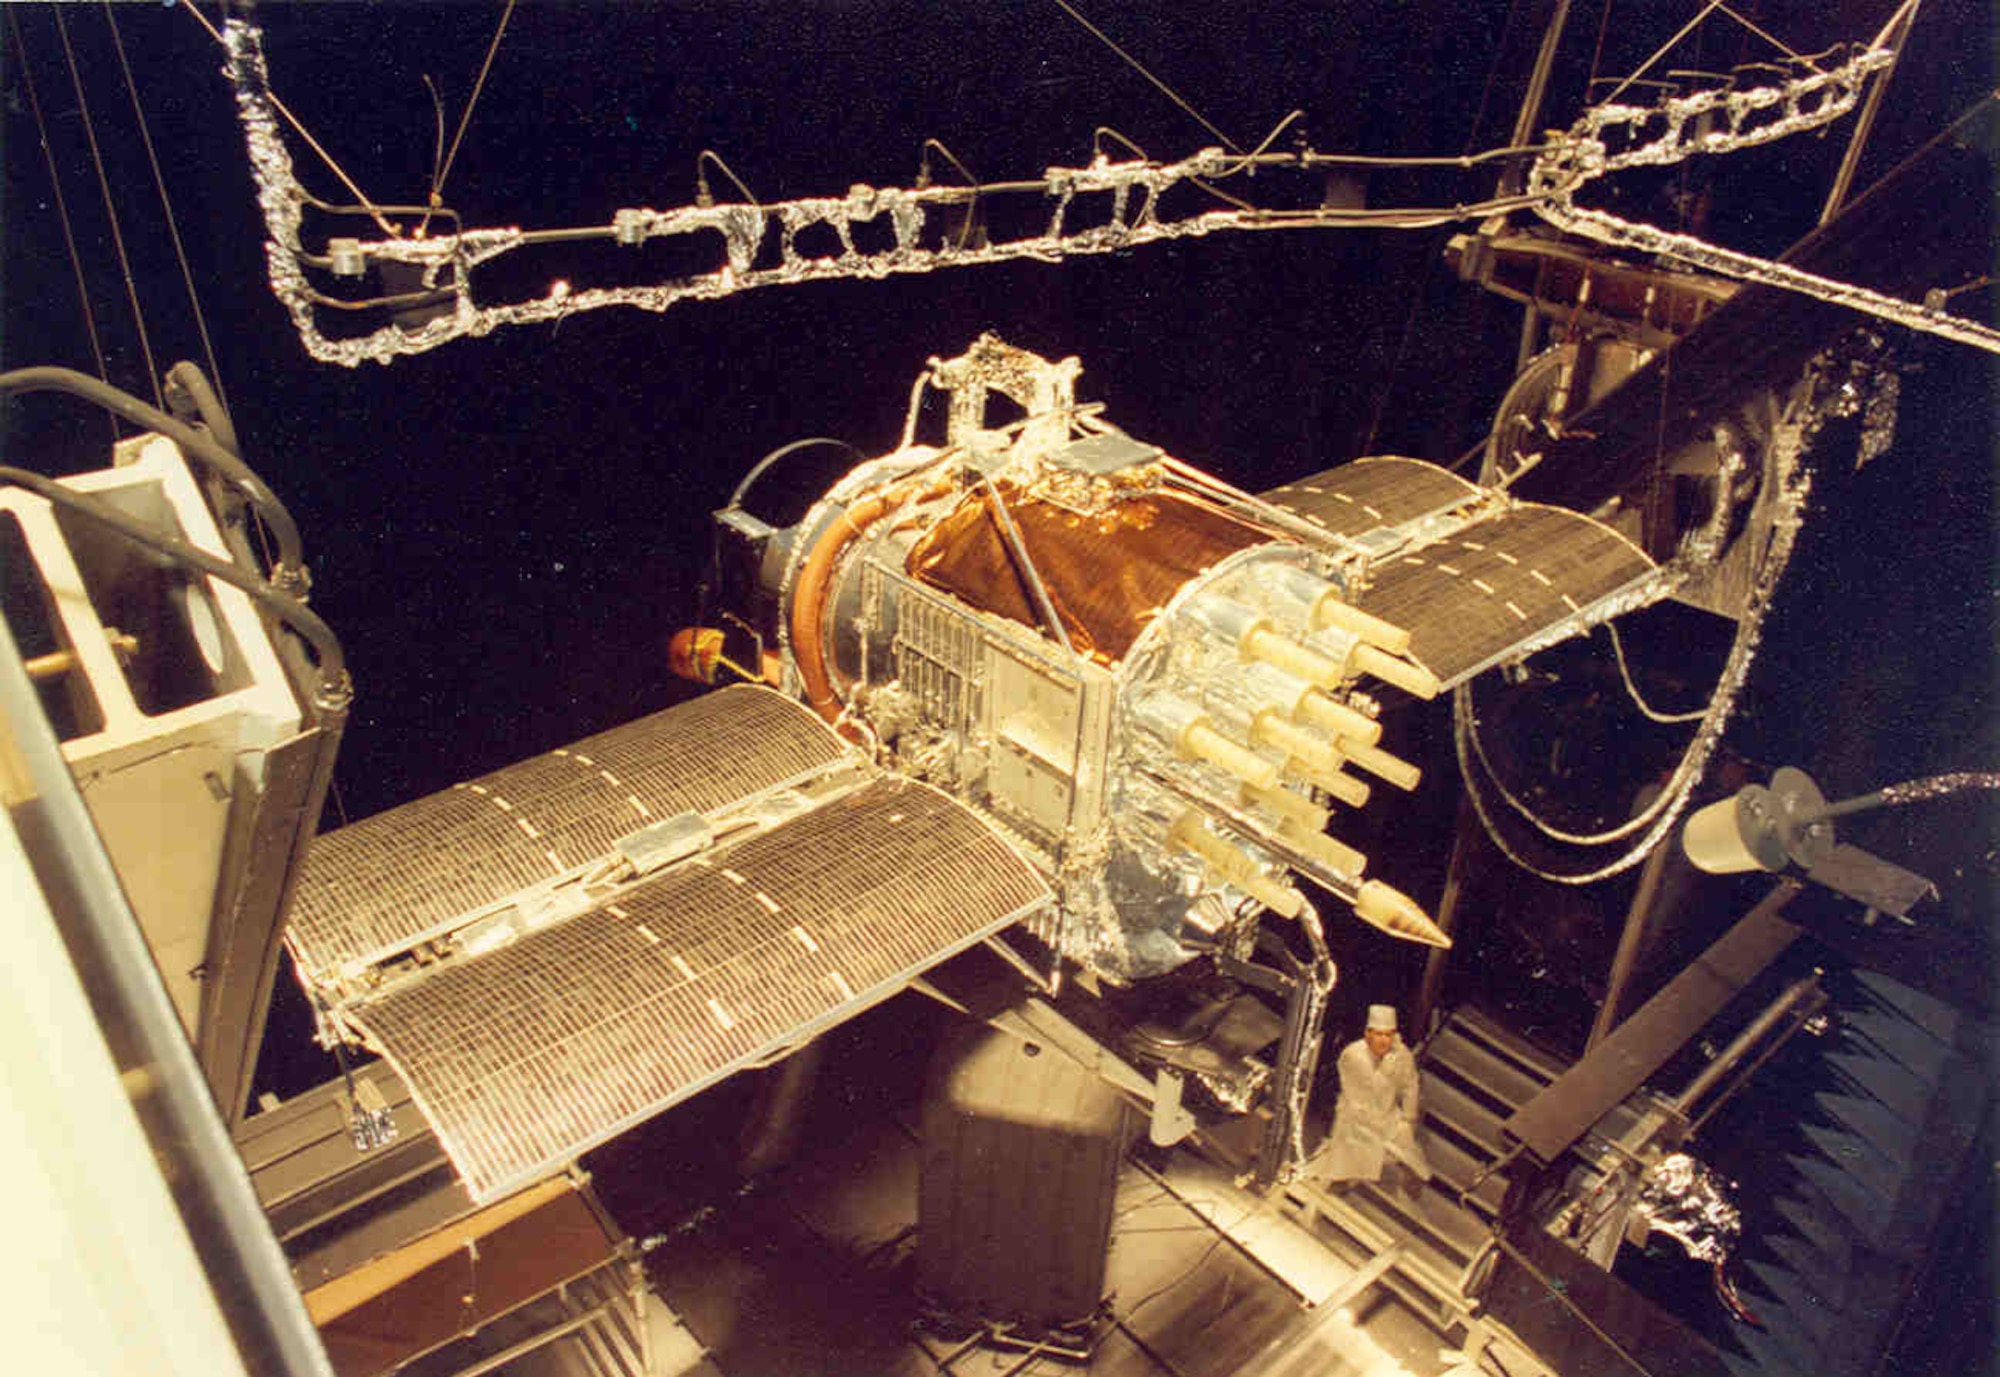 A full-scale GPS was tested in the Mark I Space Chamber at AEDC in 1977. The tests checked reliability of the satellite's systems prior to its launch in 1978. AEDC personnel reflected back on this testing on July 17, 2015, the 20th anniversary of when GPS reached full-operational capability. 